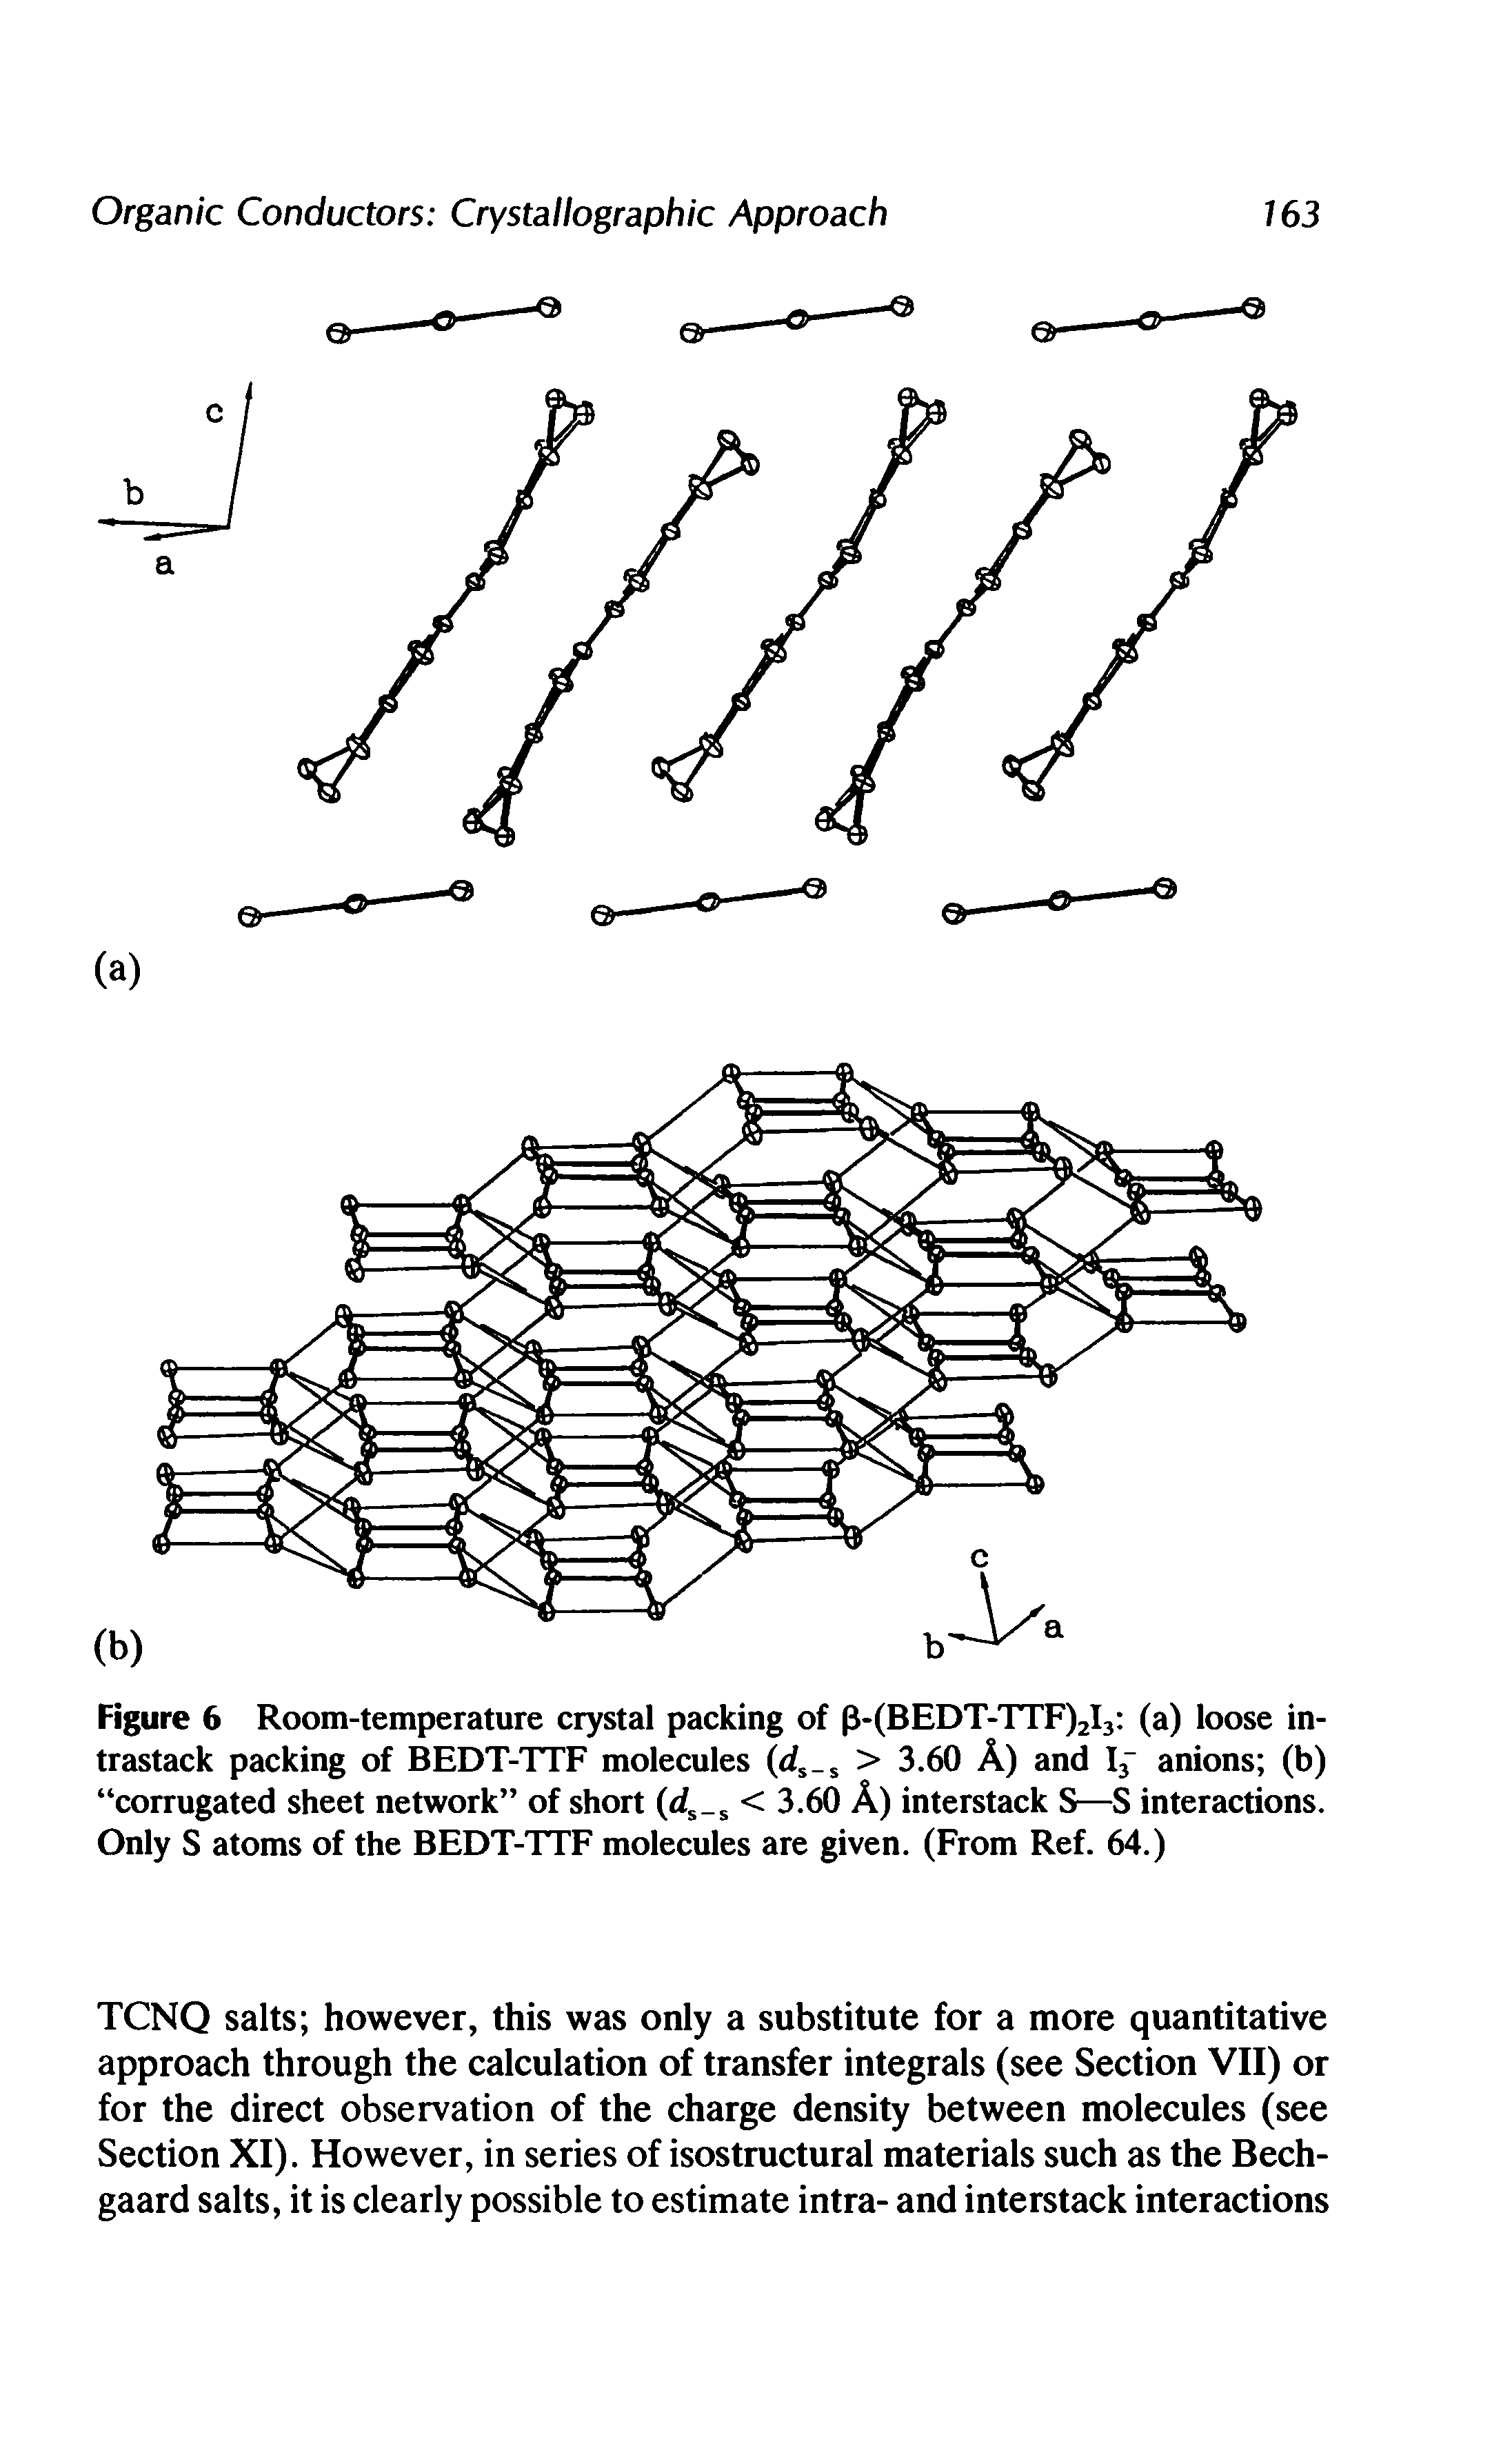 Figure 6 Room-temperature crystal packing of 0-(BEDT-TTF)2I3 (a) loose intrastack packing of BEDT-TTF molecules (ds s > 3.60 A) and I3 anions (b) corrugated sheet network of short (ds s < 3.60 A) interstack S—S interactions. Only S atoms of the BEDT-TTF molecules are given. (From Ref. 64.)...